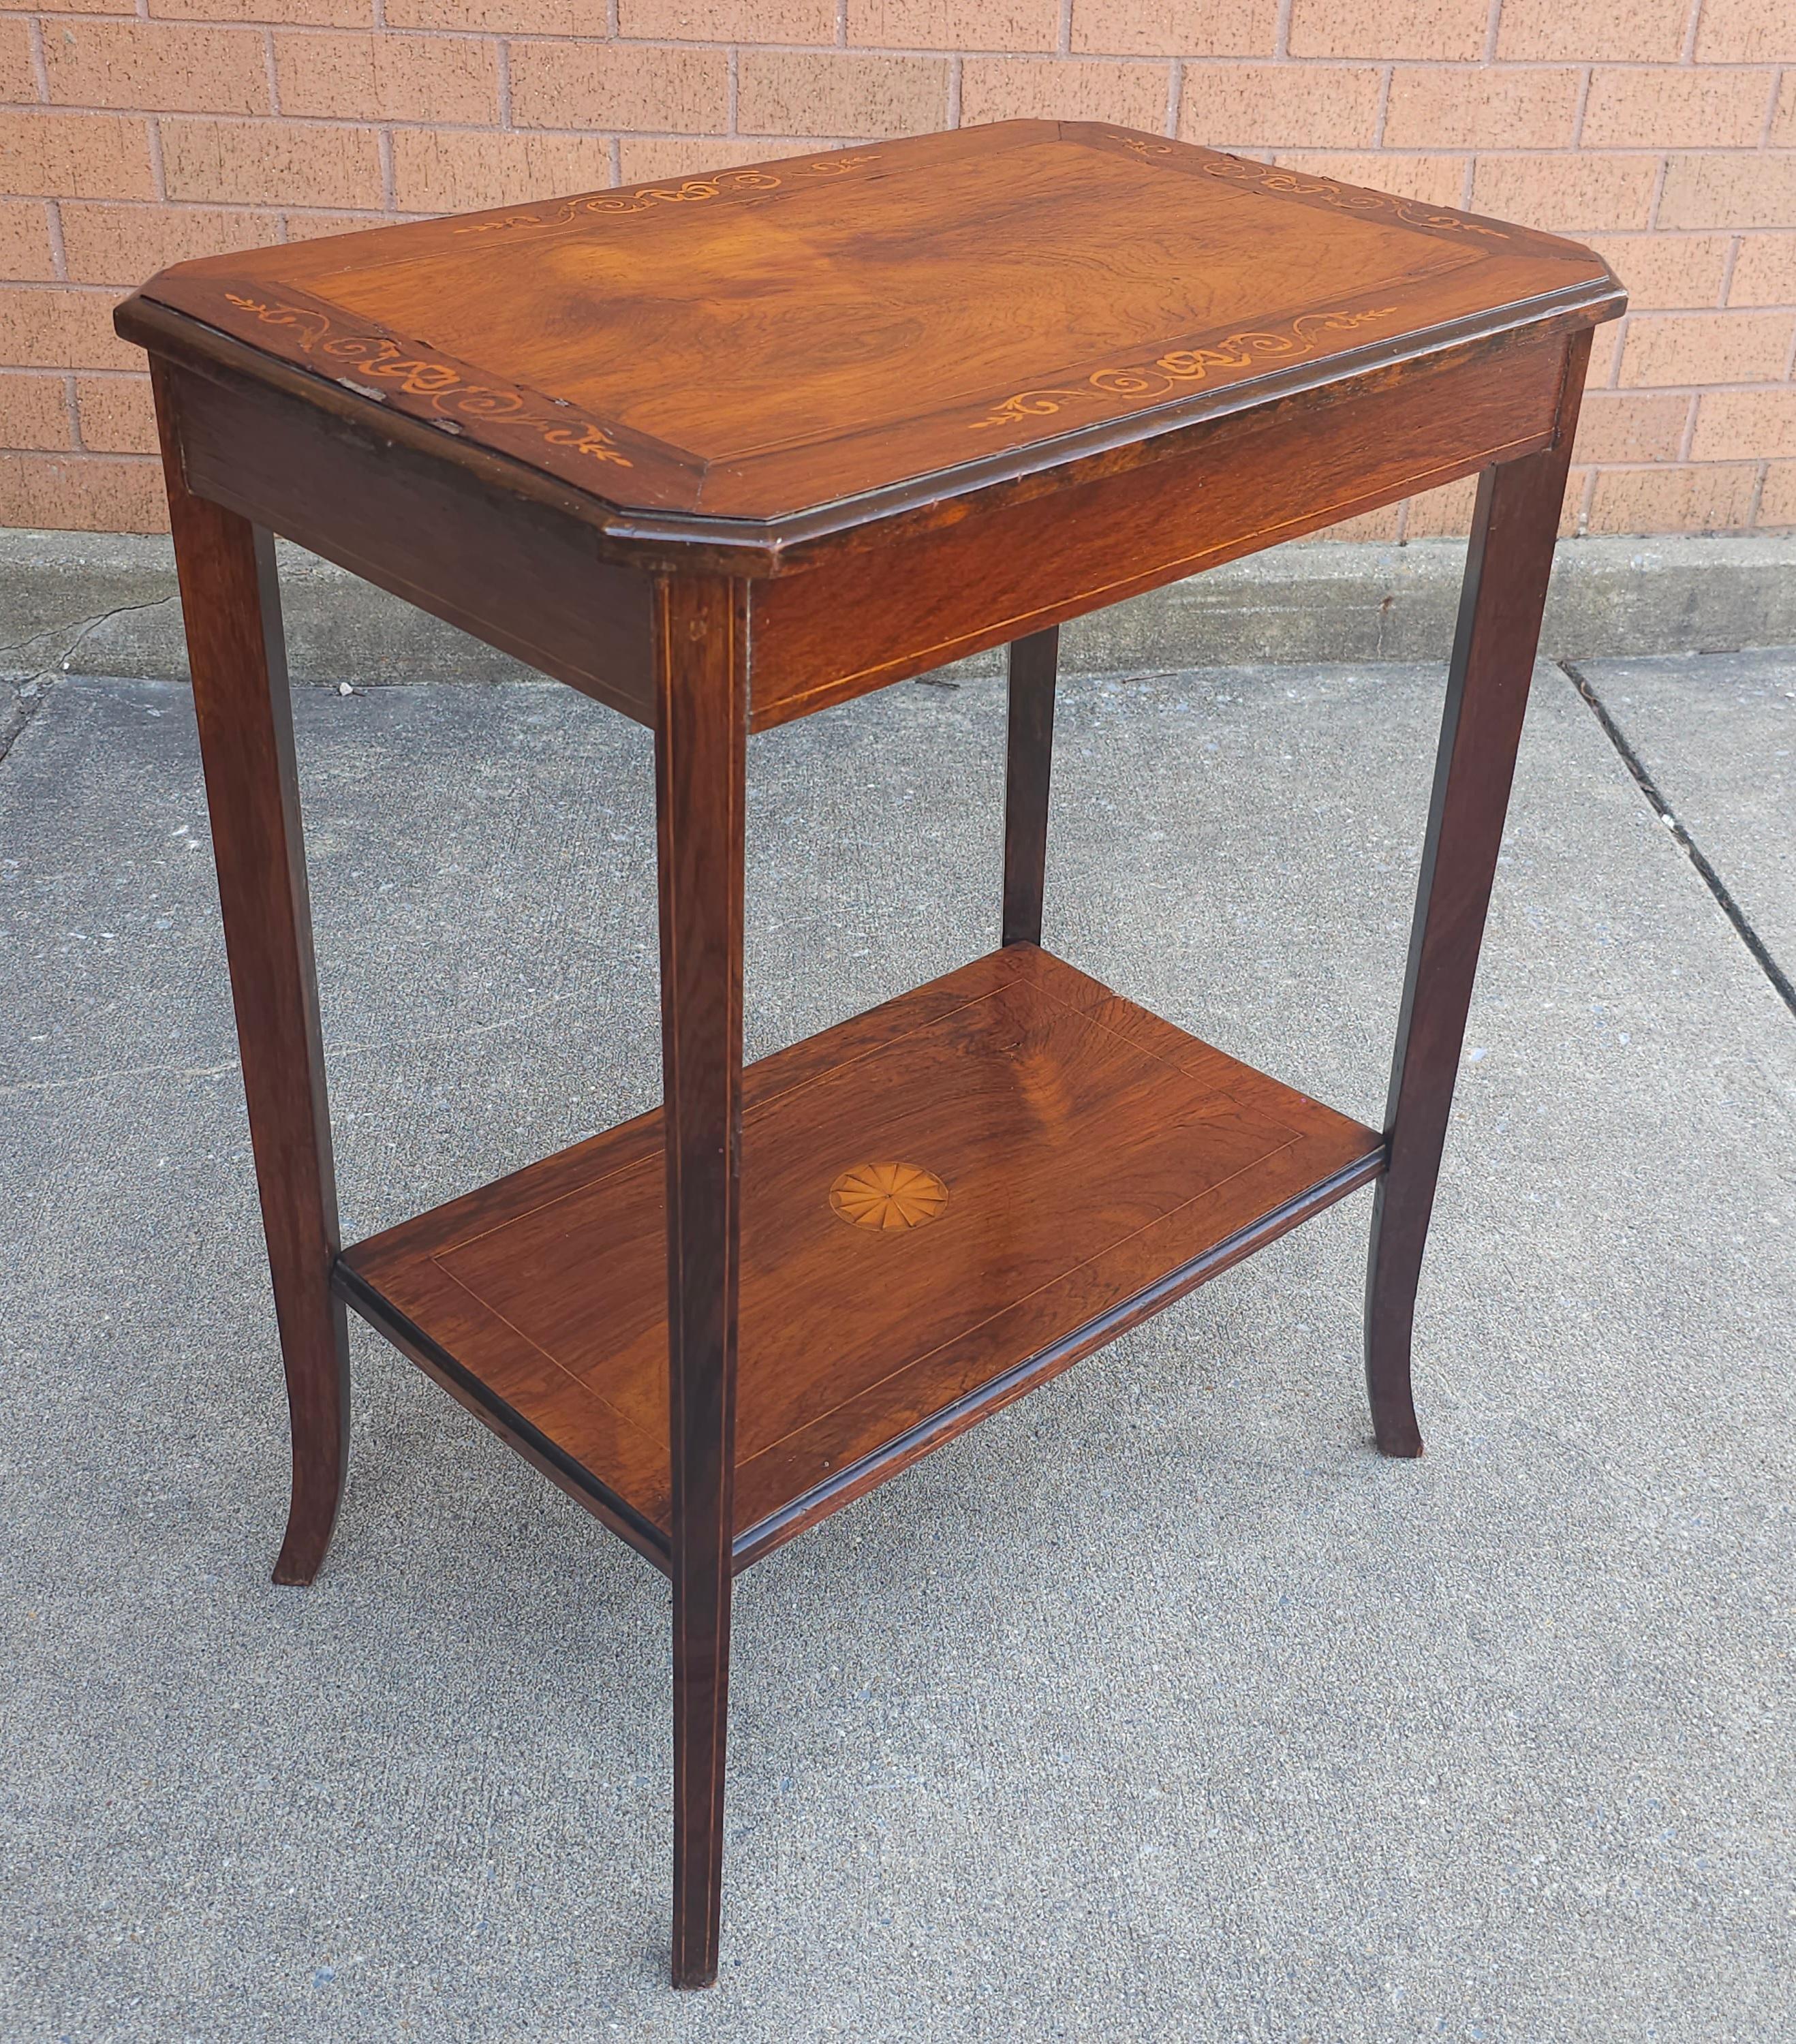 Américain Early 20th C. Edwardian Rosewood Marquetry Inlaid  Table d'appoint en vente